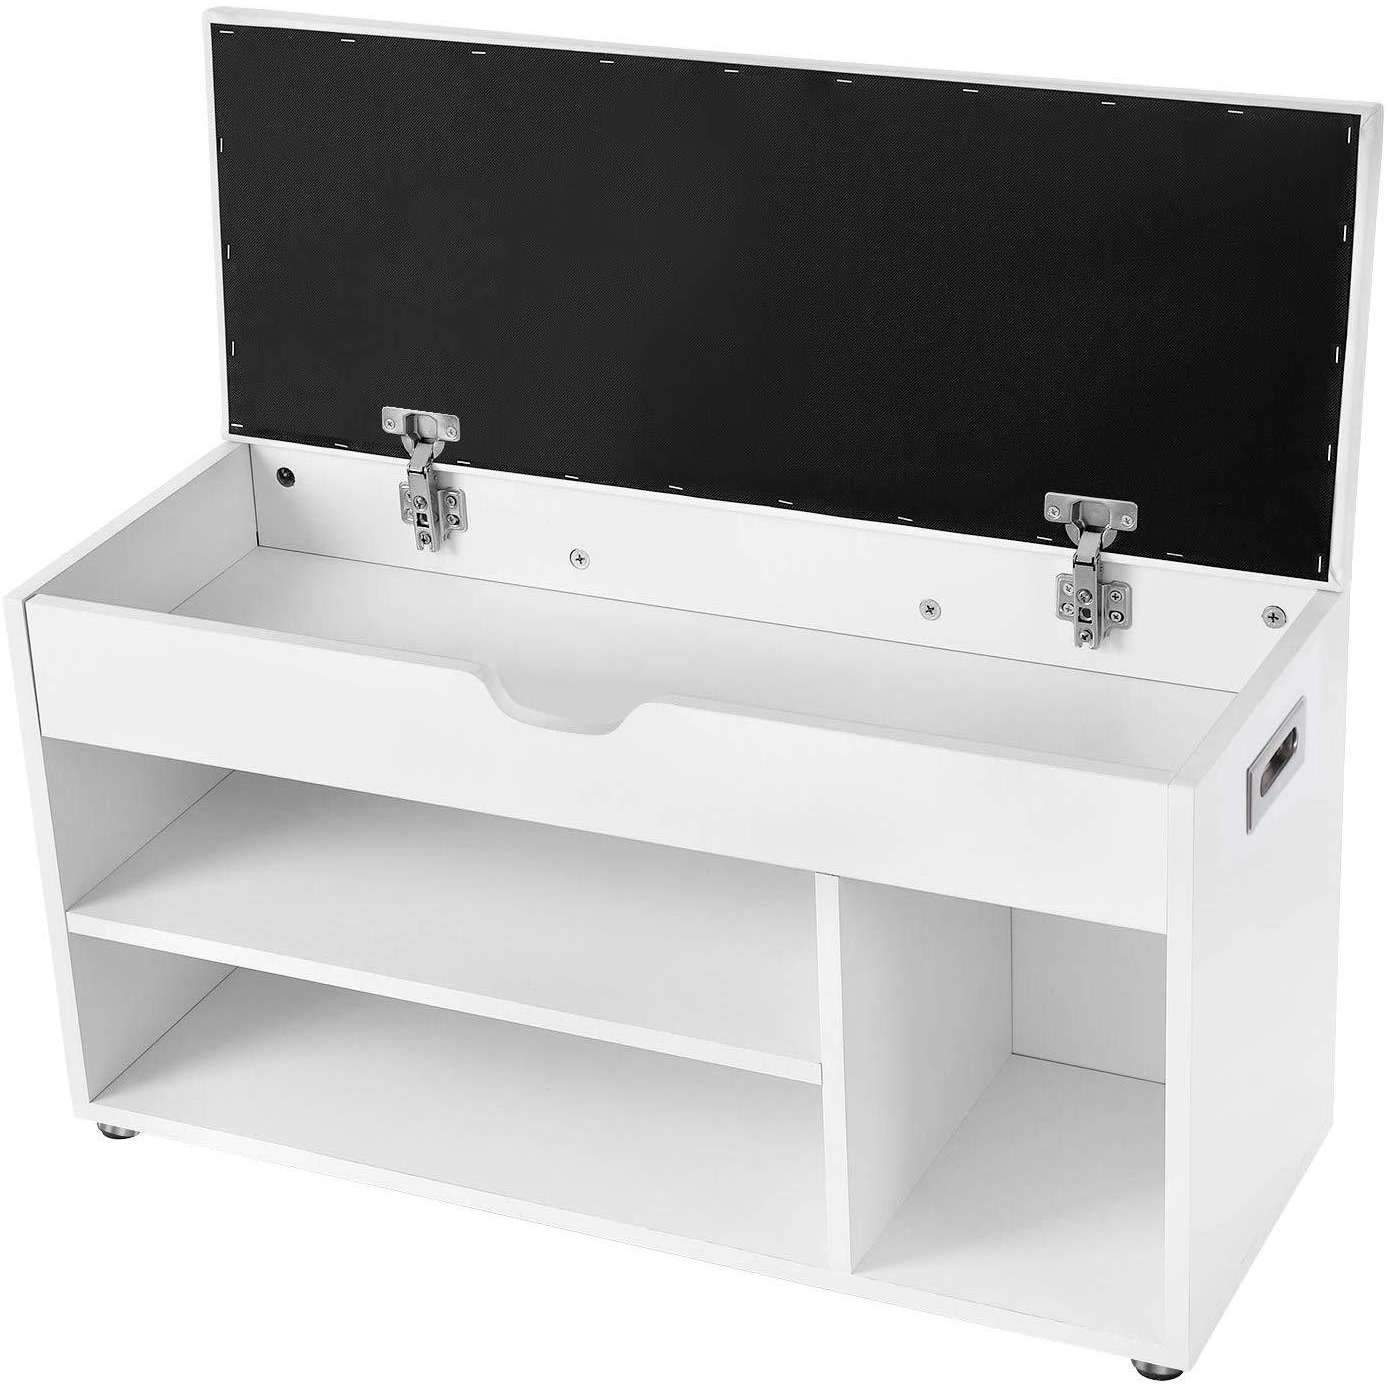 Nancy's Shoe Cabinet White - Multifunctional Cabinet - Wooden Shoe Cabinets with storage space - 80 x 44 x 30 cm (W x H x D)